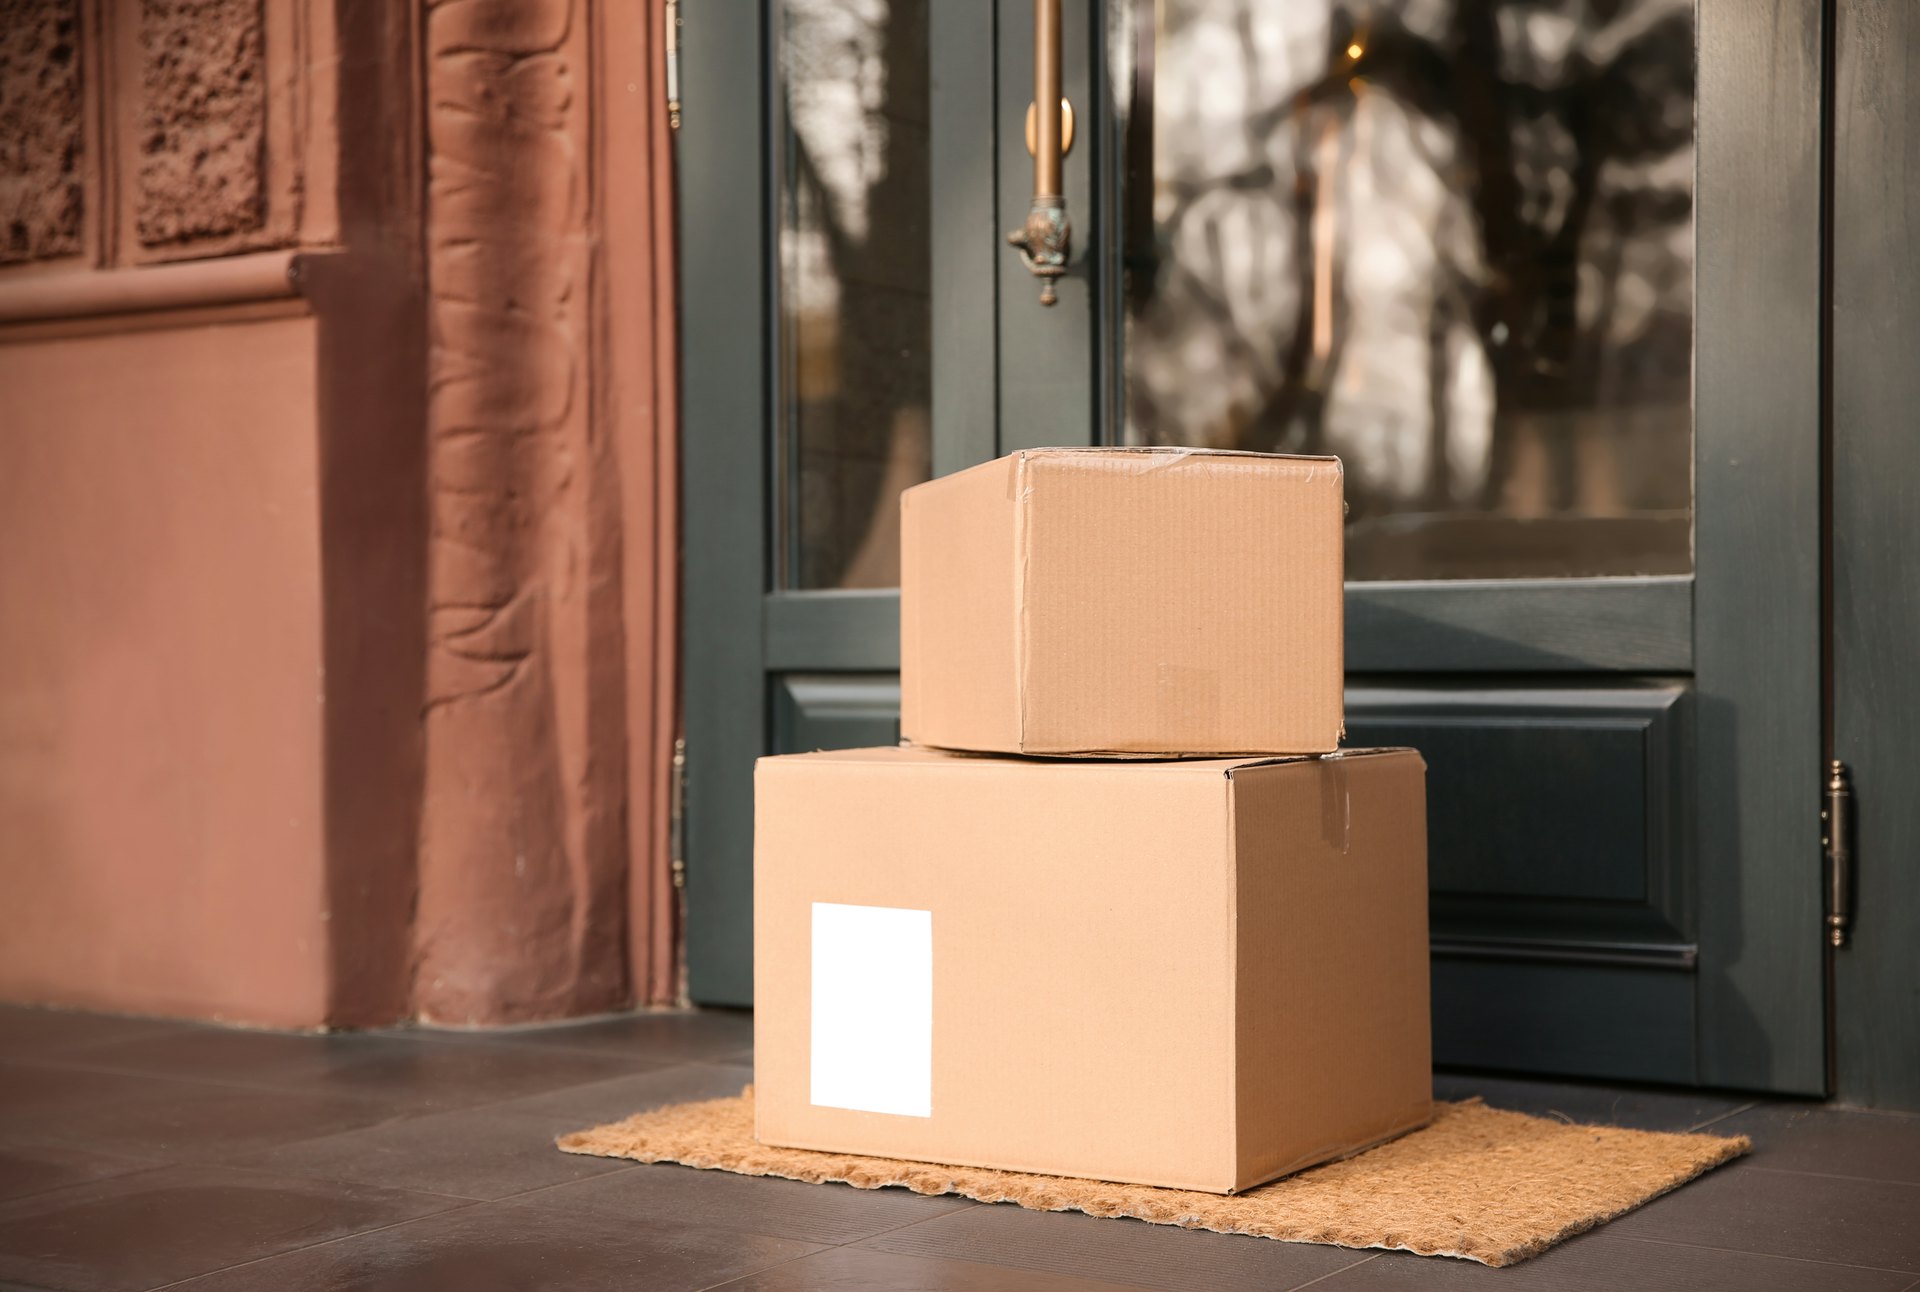 How Low Demand for Cardboard Boxes Could Signal a Recession